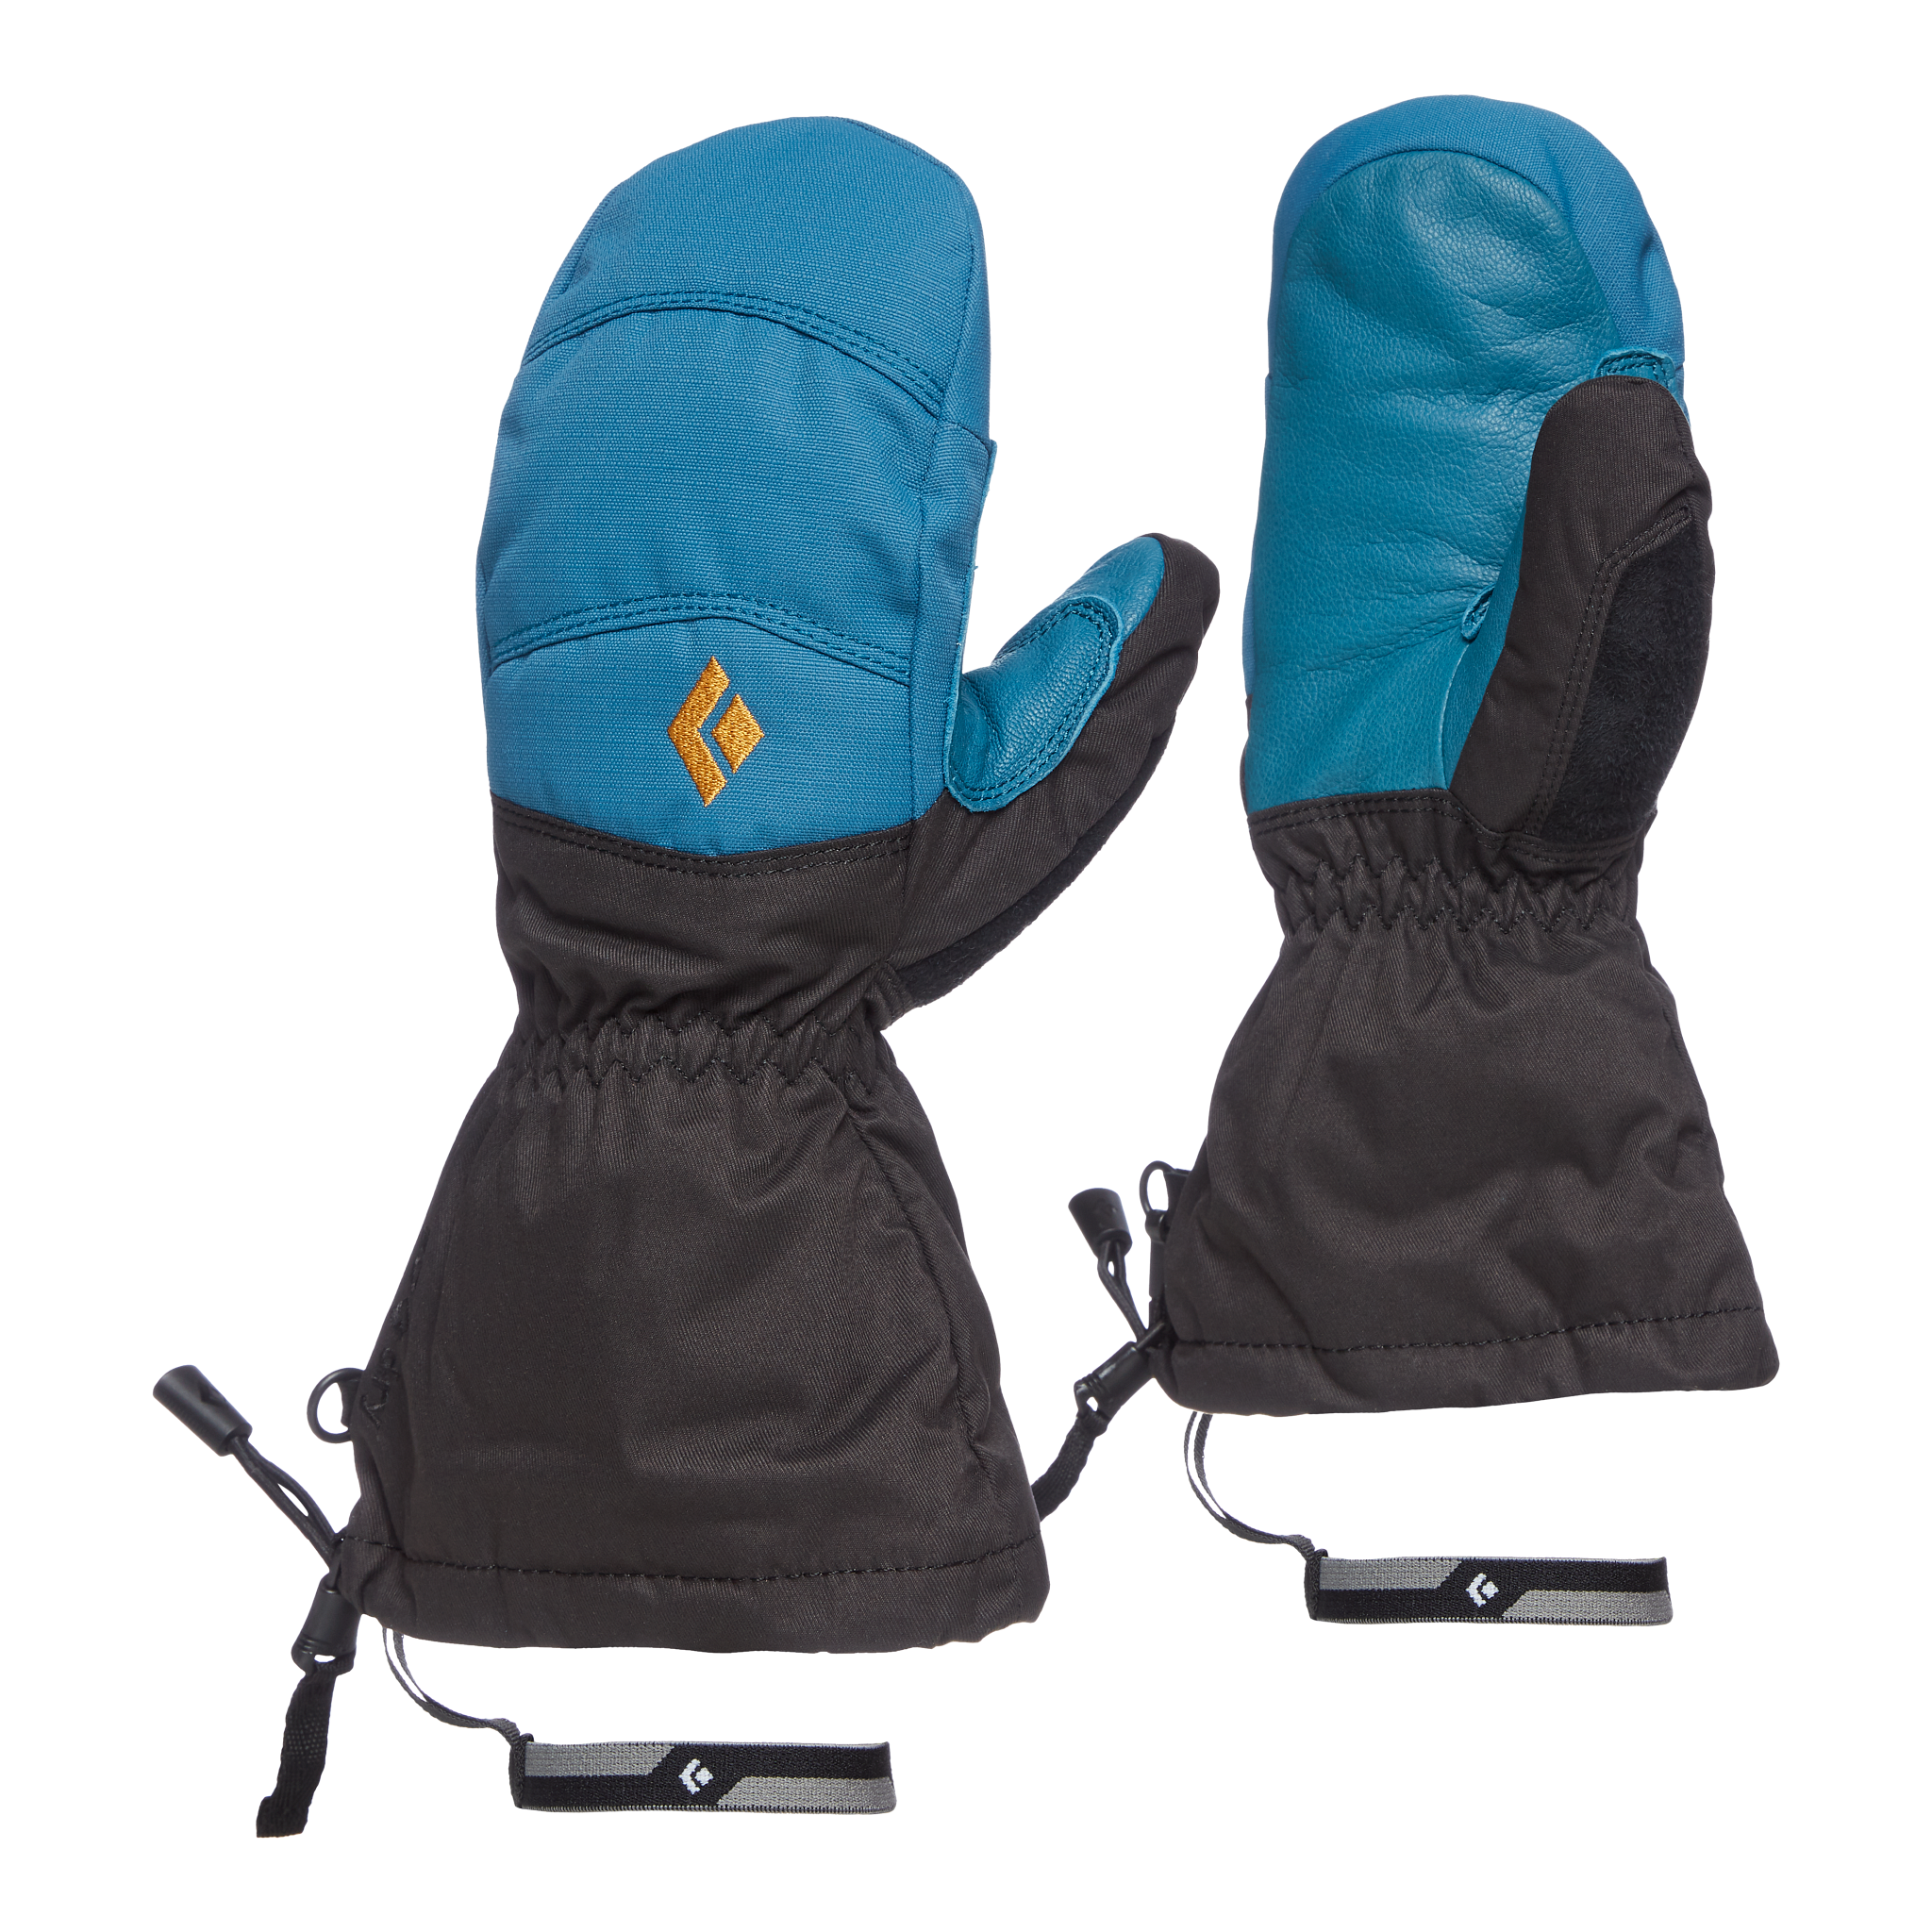 Black Diamond Equipment Recon Mitts - Kids' Size Small, in Astral Blue